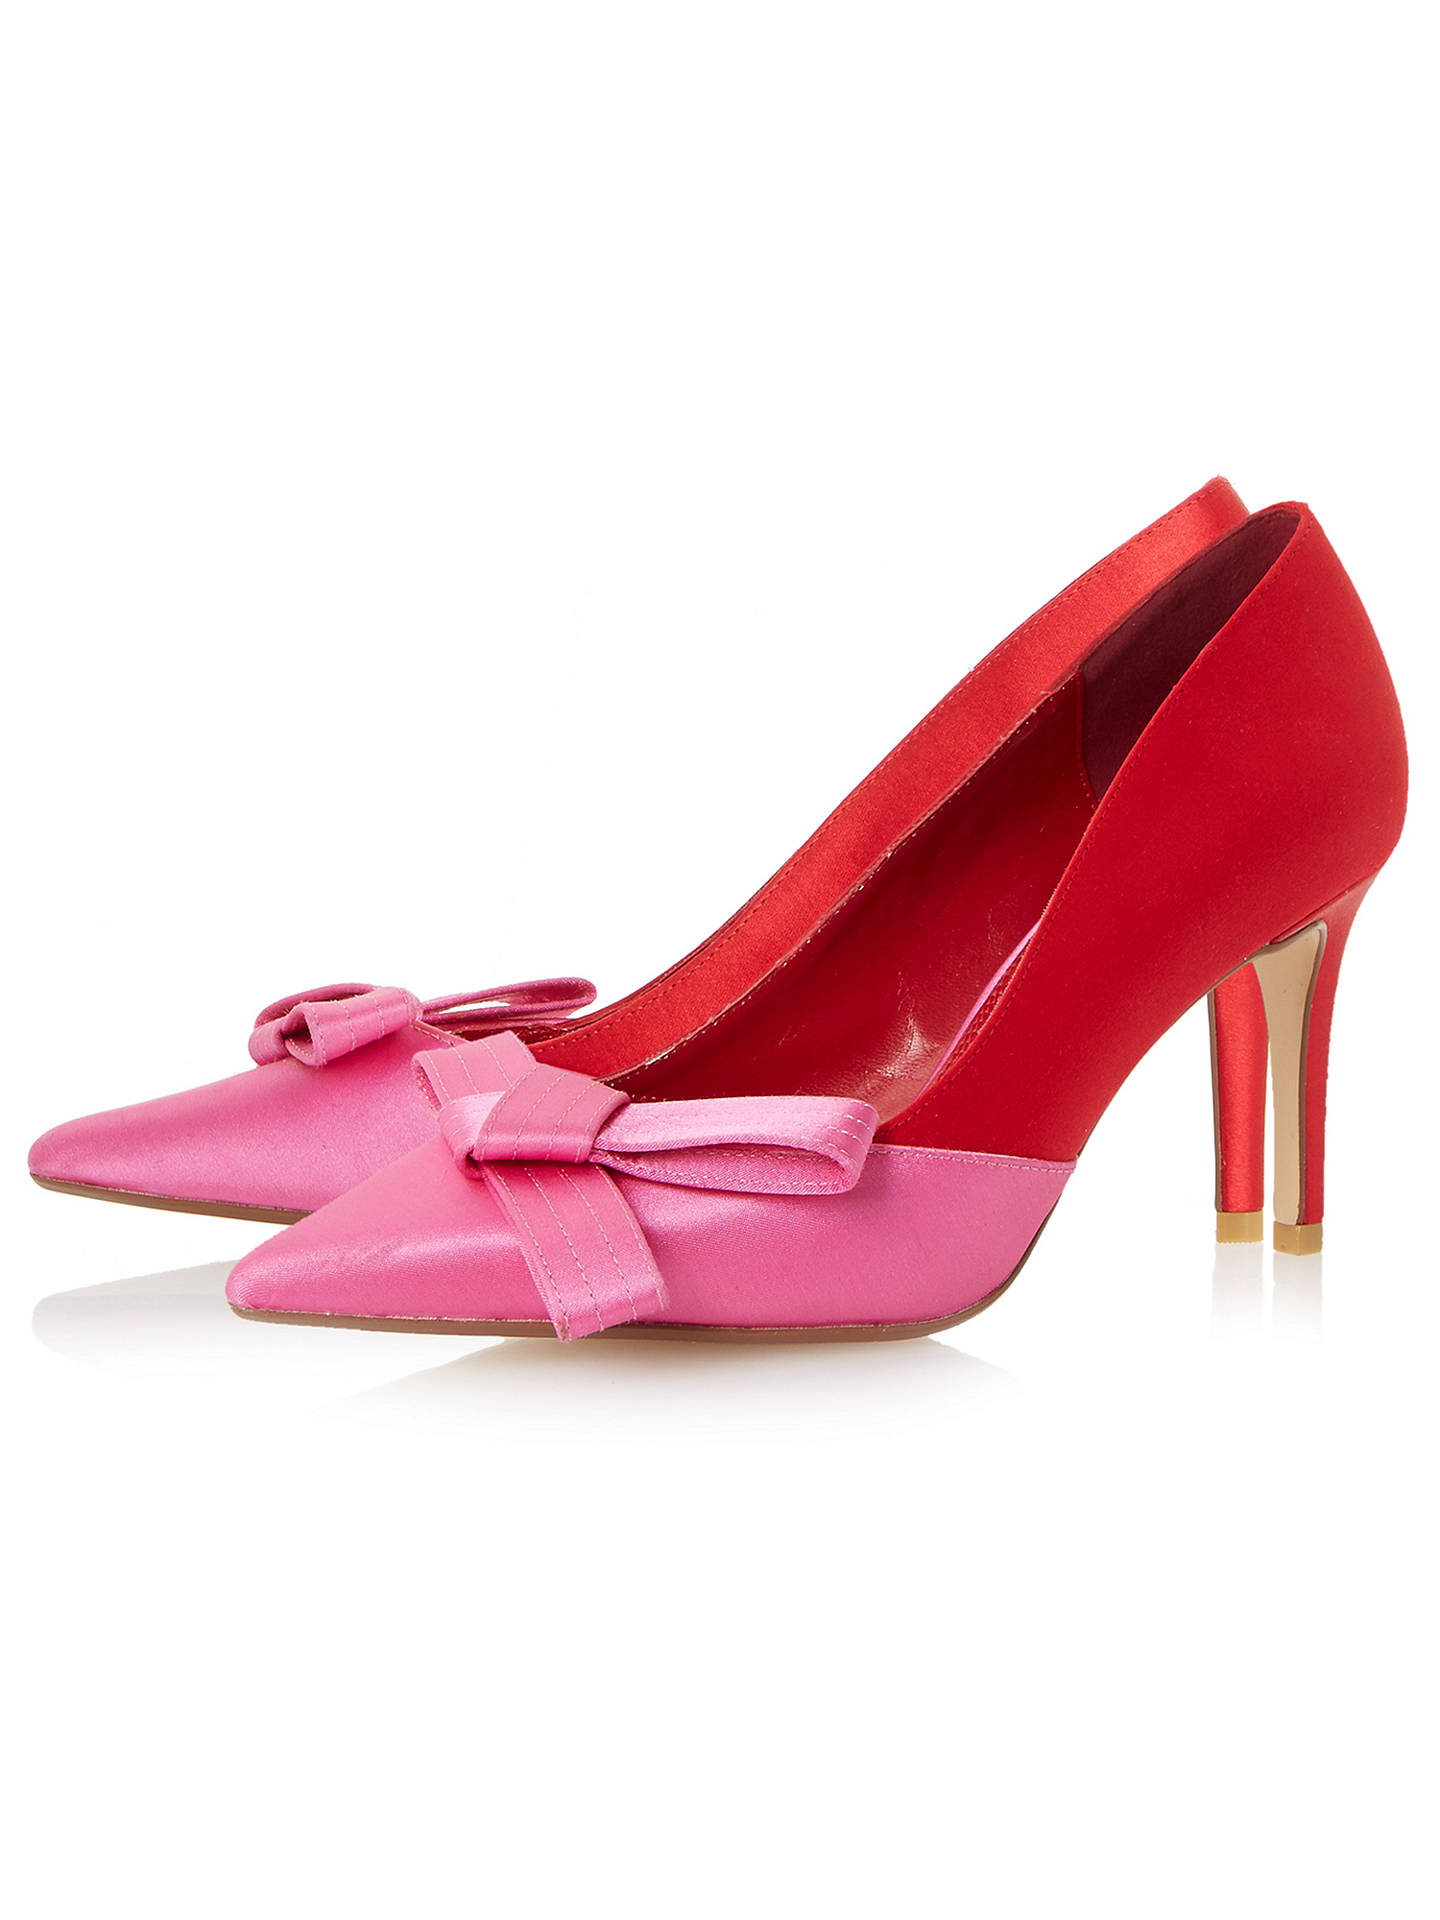 Dune Bowiee Pointed Toe Court Shoes, Red at John Lewis & Partners